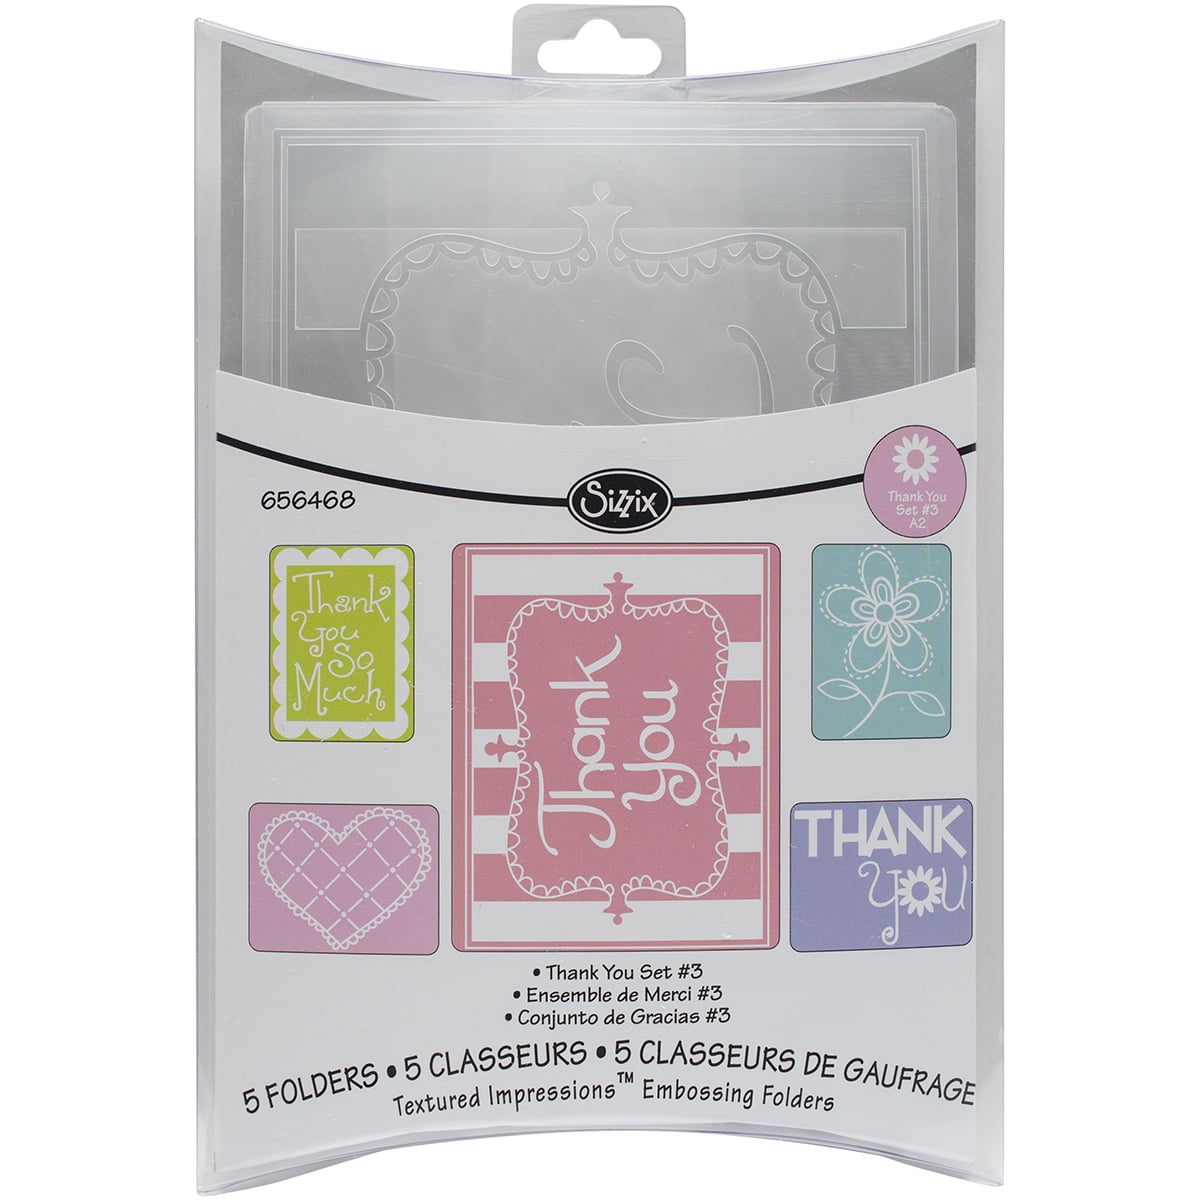 Sizzix Textured Impressions Embossing Folders 5PK - Thank You Set #2